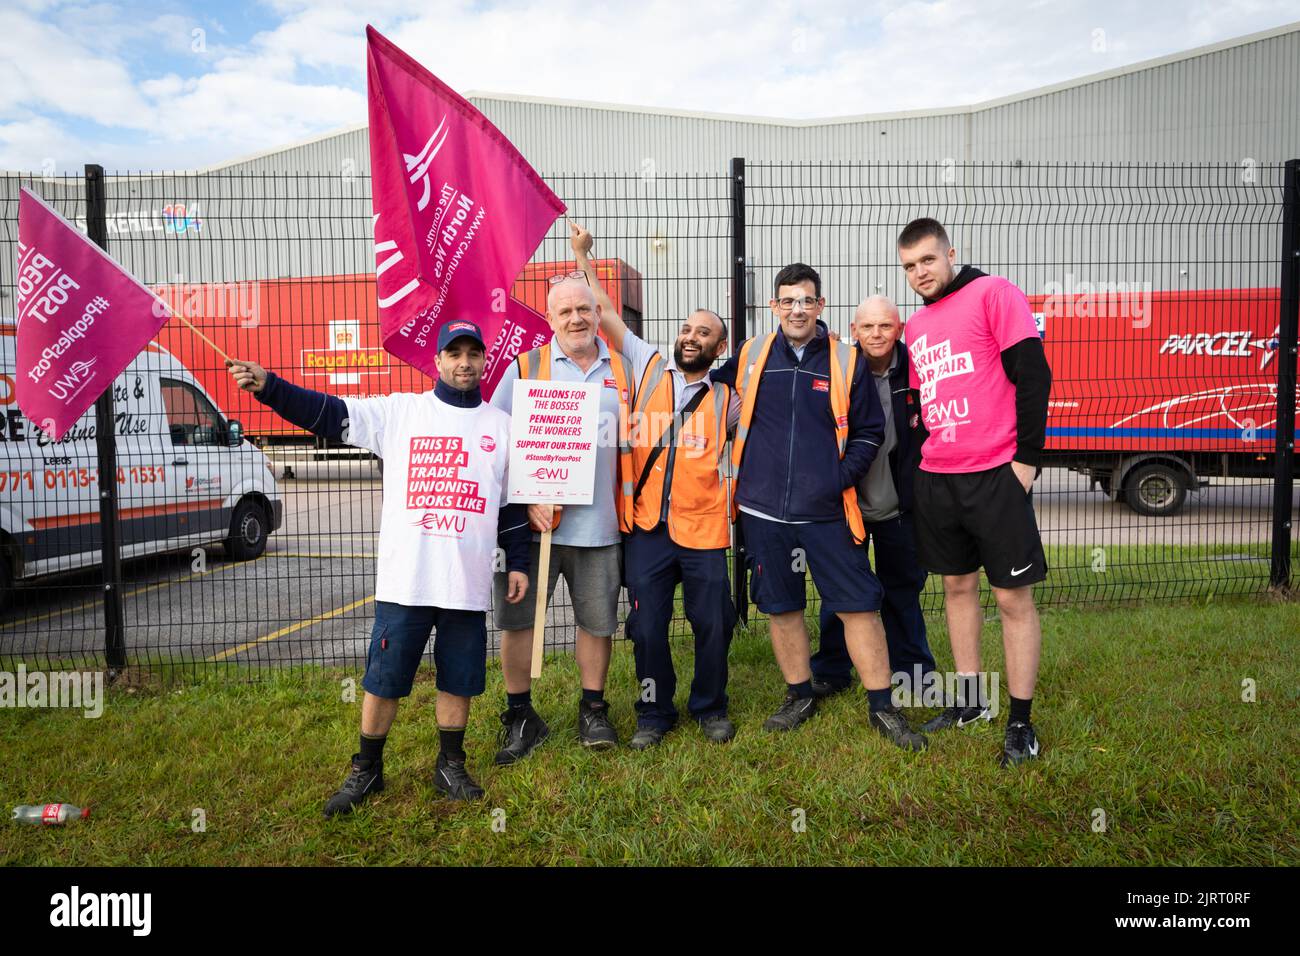 Manchseter, UK. 26th Aug, 2022. Royal Mail staff gather at the picket line for the first day of strikes. Members of the Communication Workers Union protest against the proposed two percent increase offered which is below inflation and during a cost of living crisis. Credit: Andy Barton/Alamy Live News Stock Photo